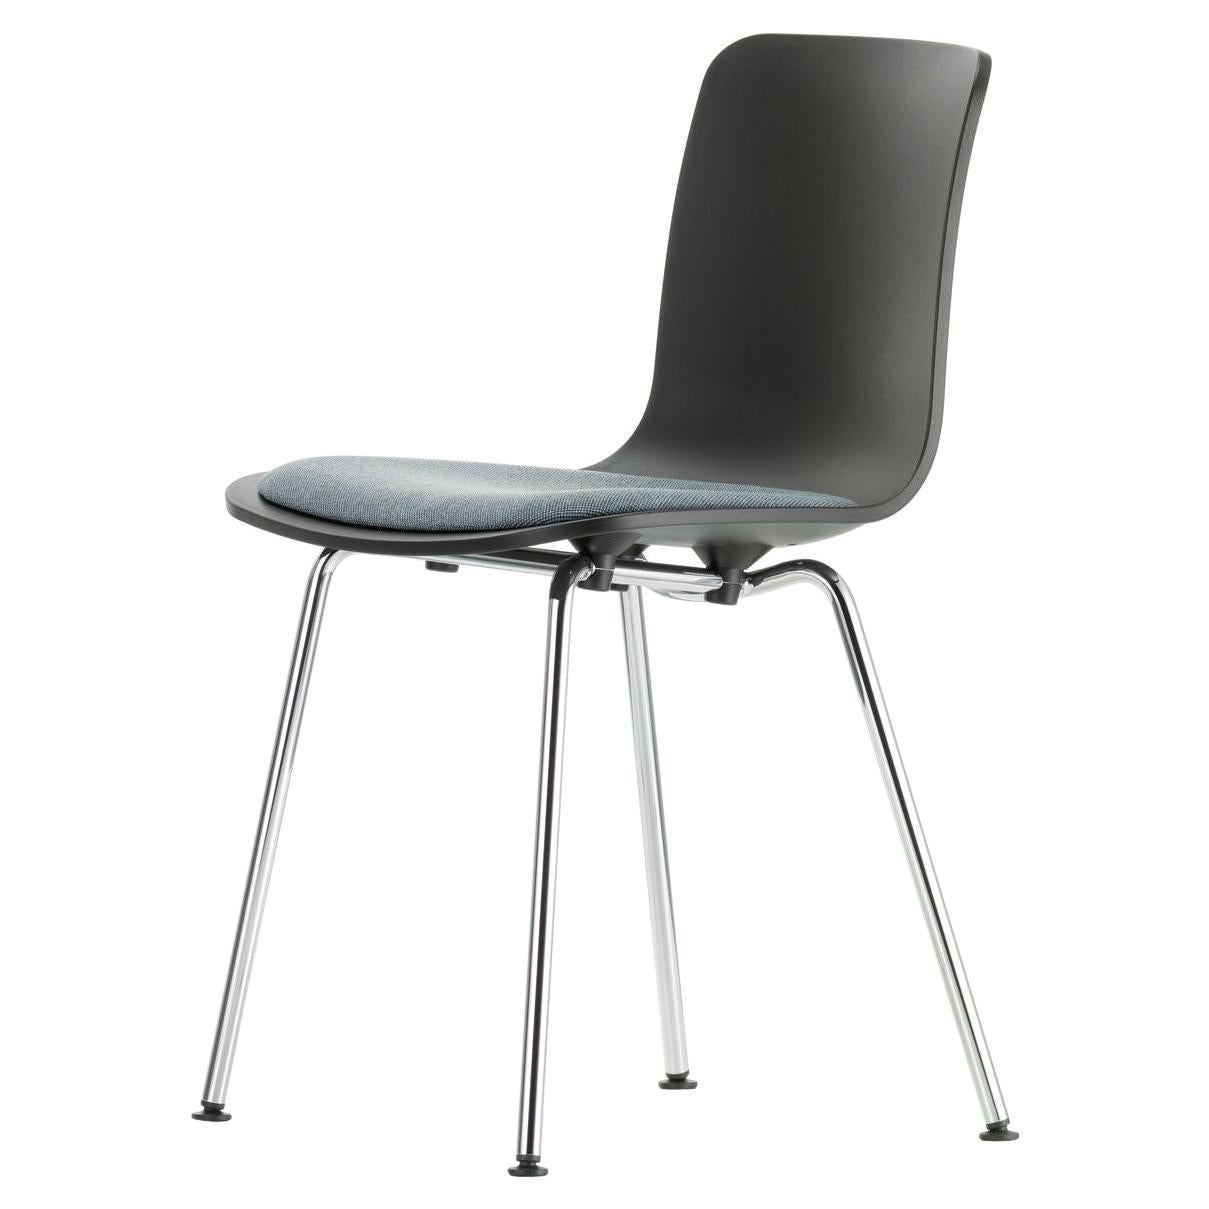 Jasper Morrison HAL Tube Chair with Seat Upholstery by Vitra